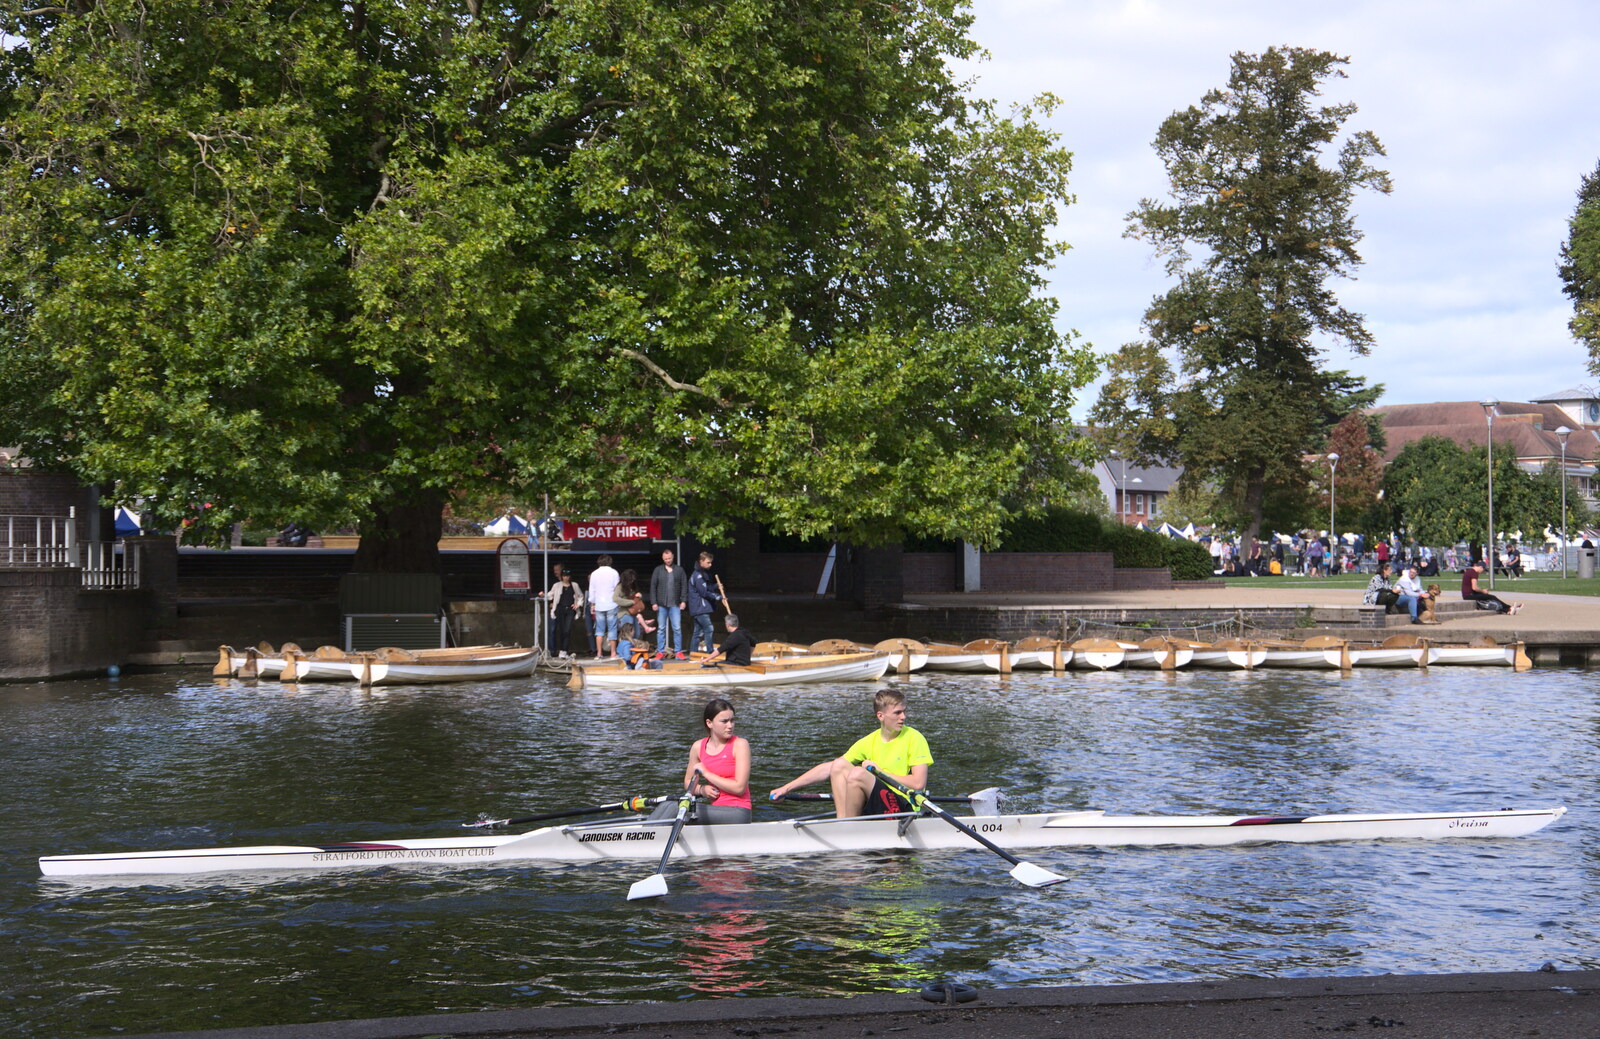 More rowing on the river from A Postcard from Stratford-upon-Avon, Warwickshire - 9th September 2018